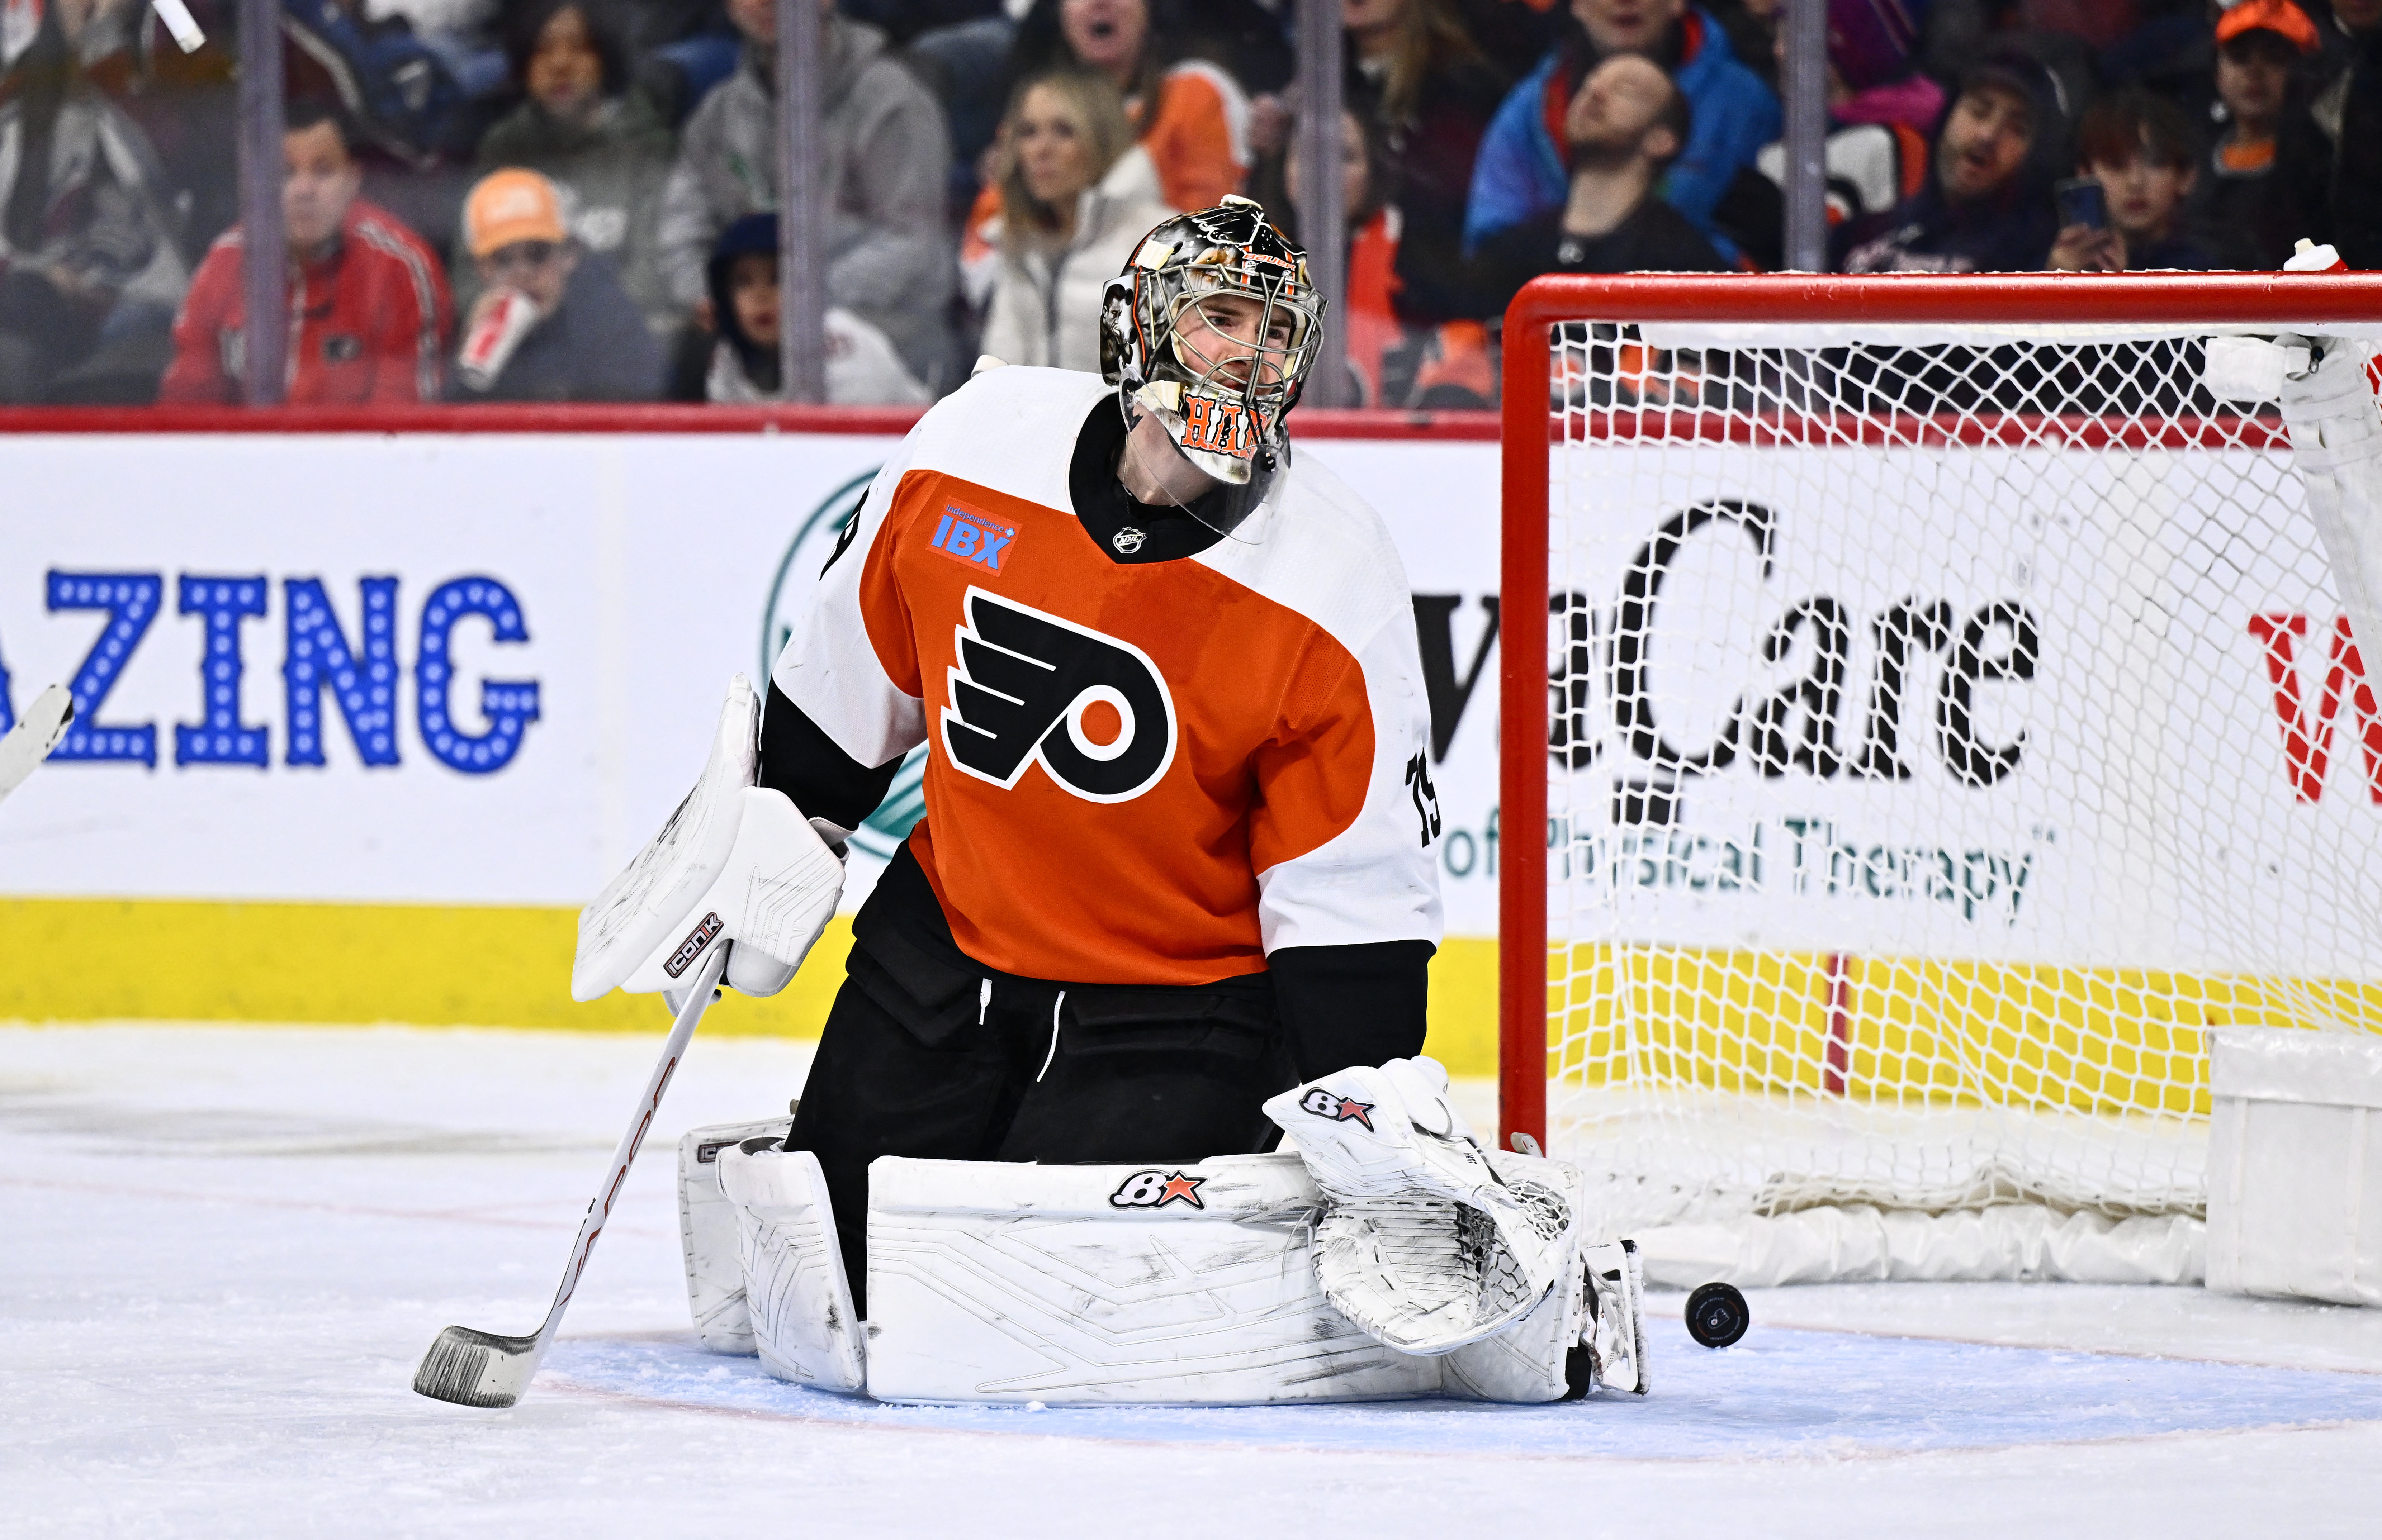 Logan O'Connor gets hat trick, Avalanche overpower Flyers